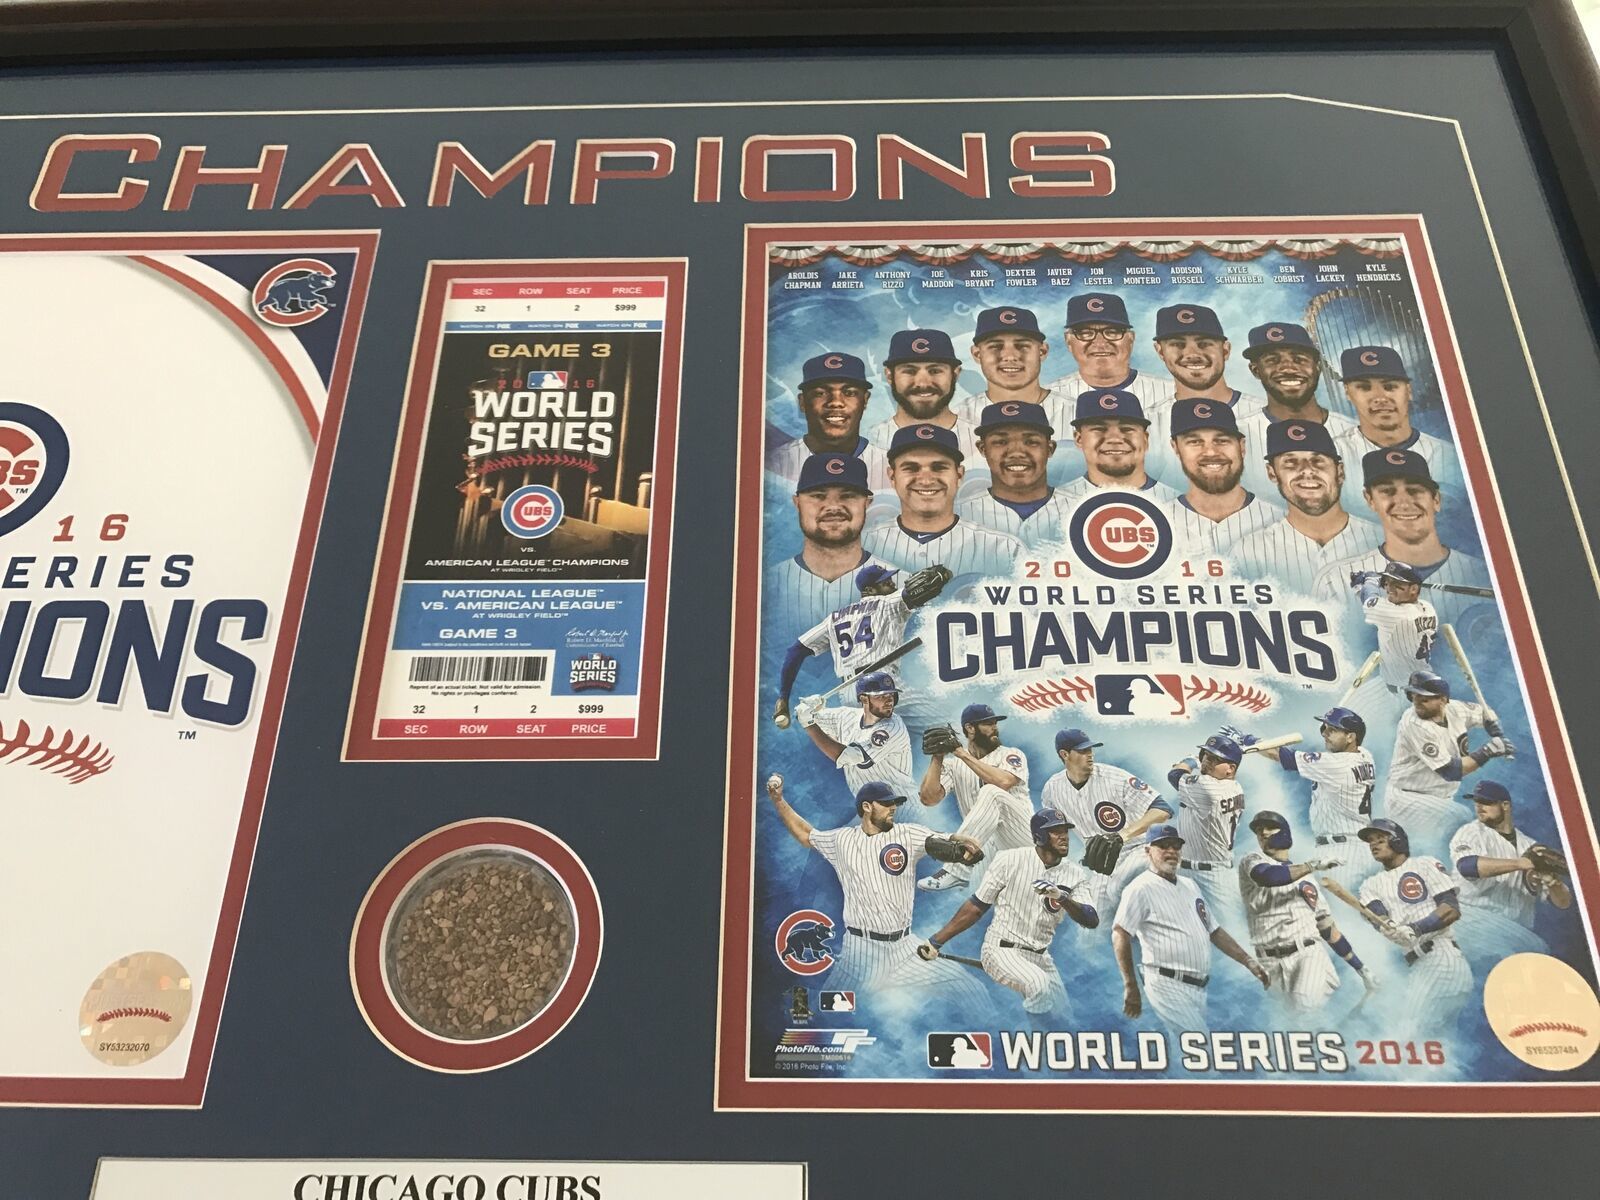 Chicago Cubs Game 7 World Series Game Used Dirt / Ticket Framed